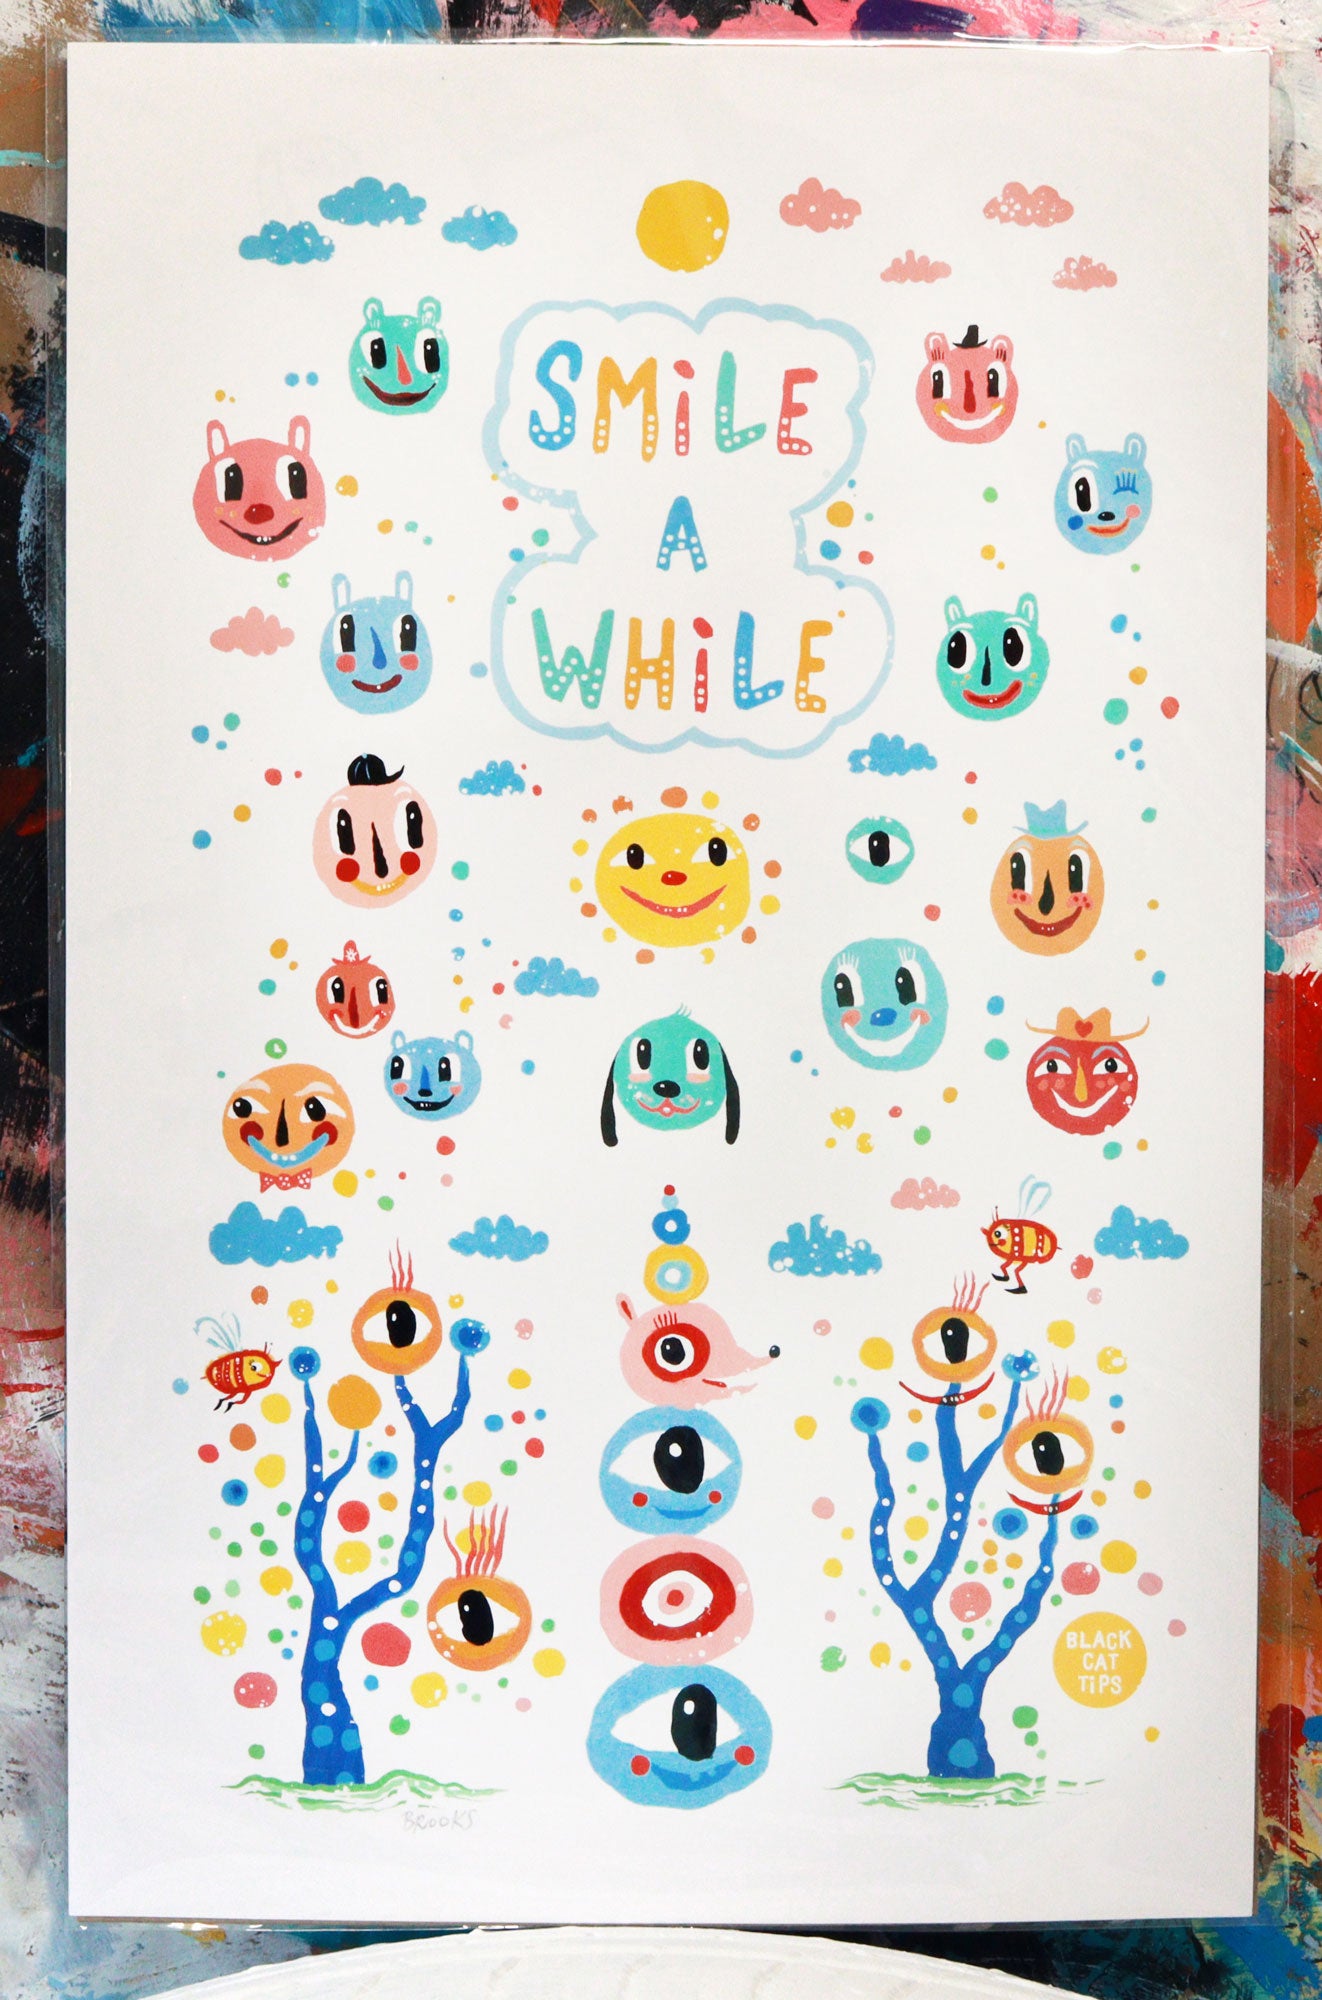 Smile A While Poster - Sunny Day